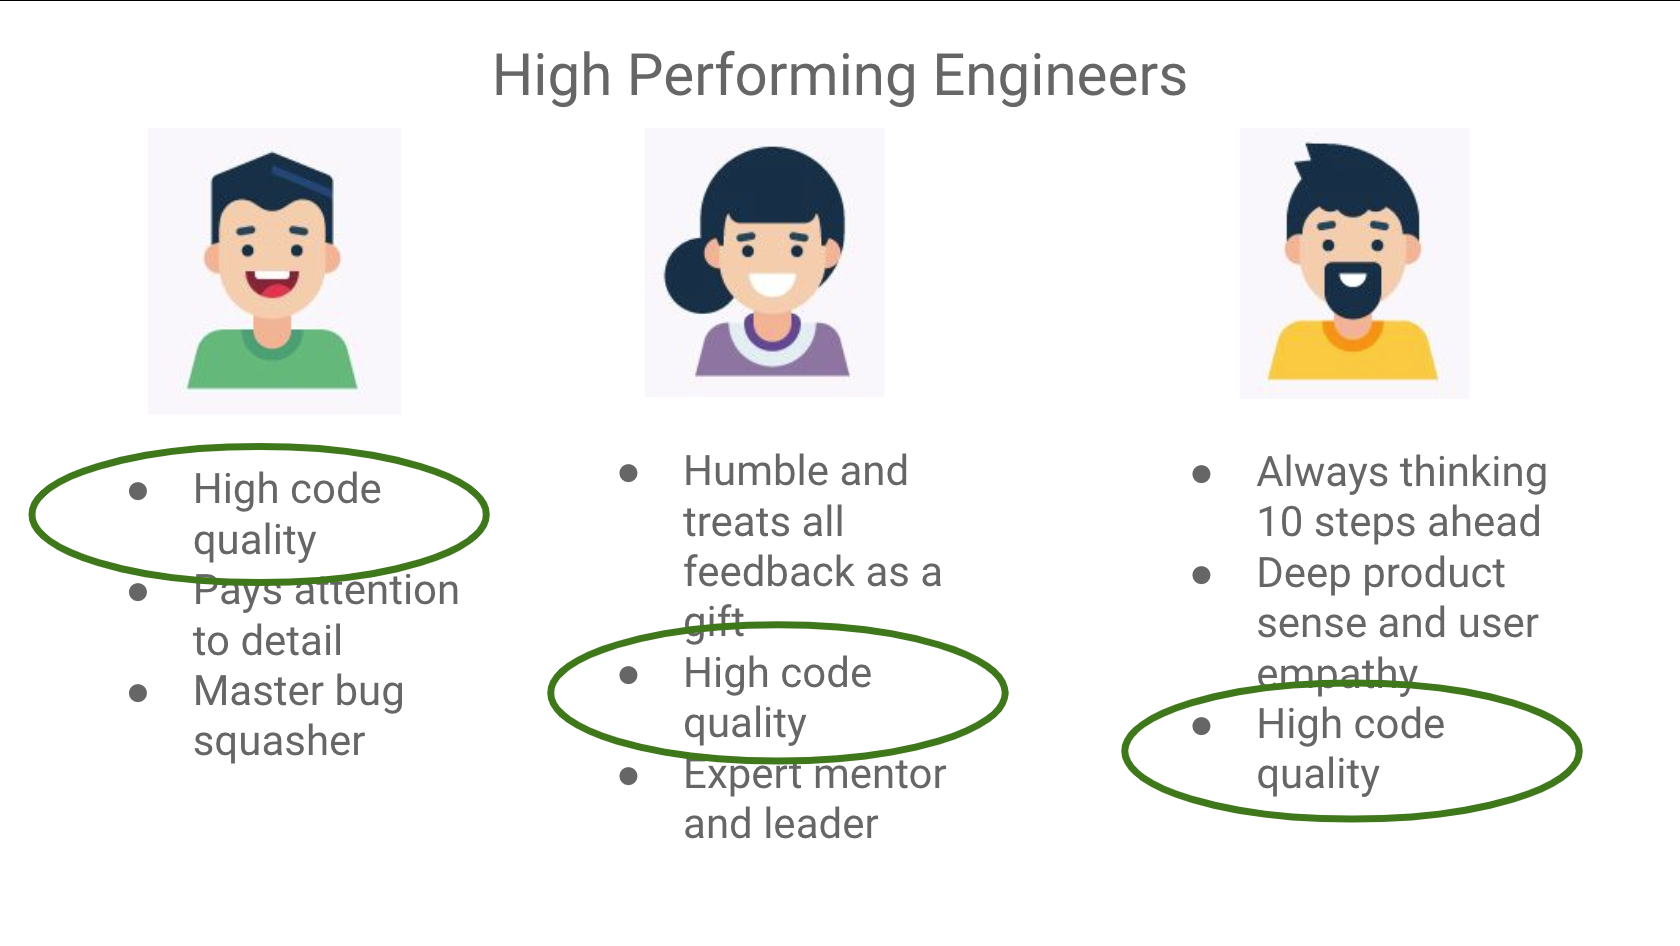 Level Up Your Code Quality As A Software Engineer [Part 2] - Code Quality = Engineer Quality